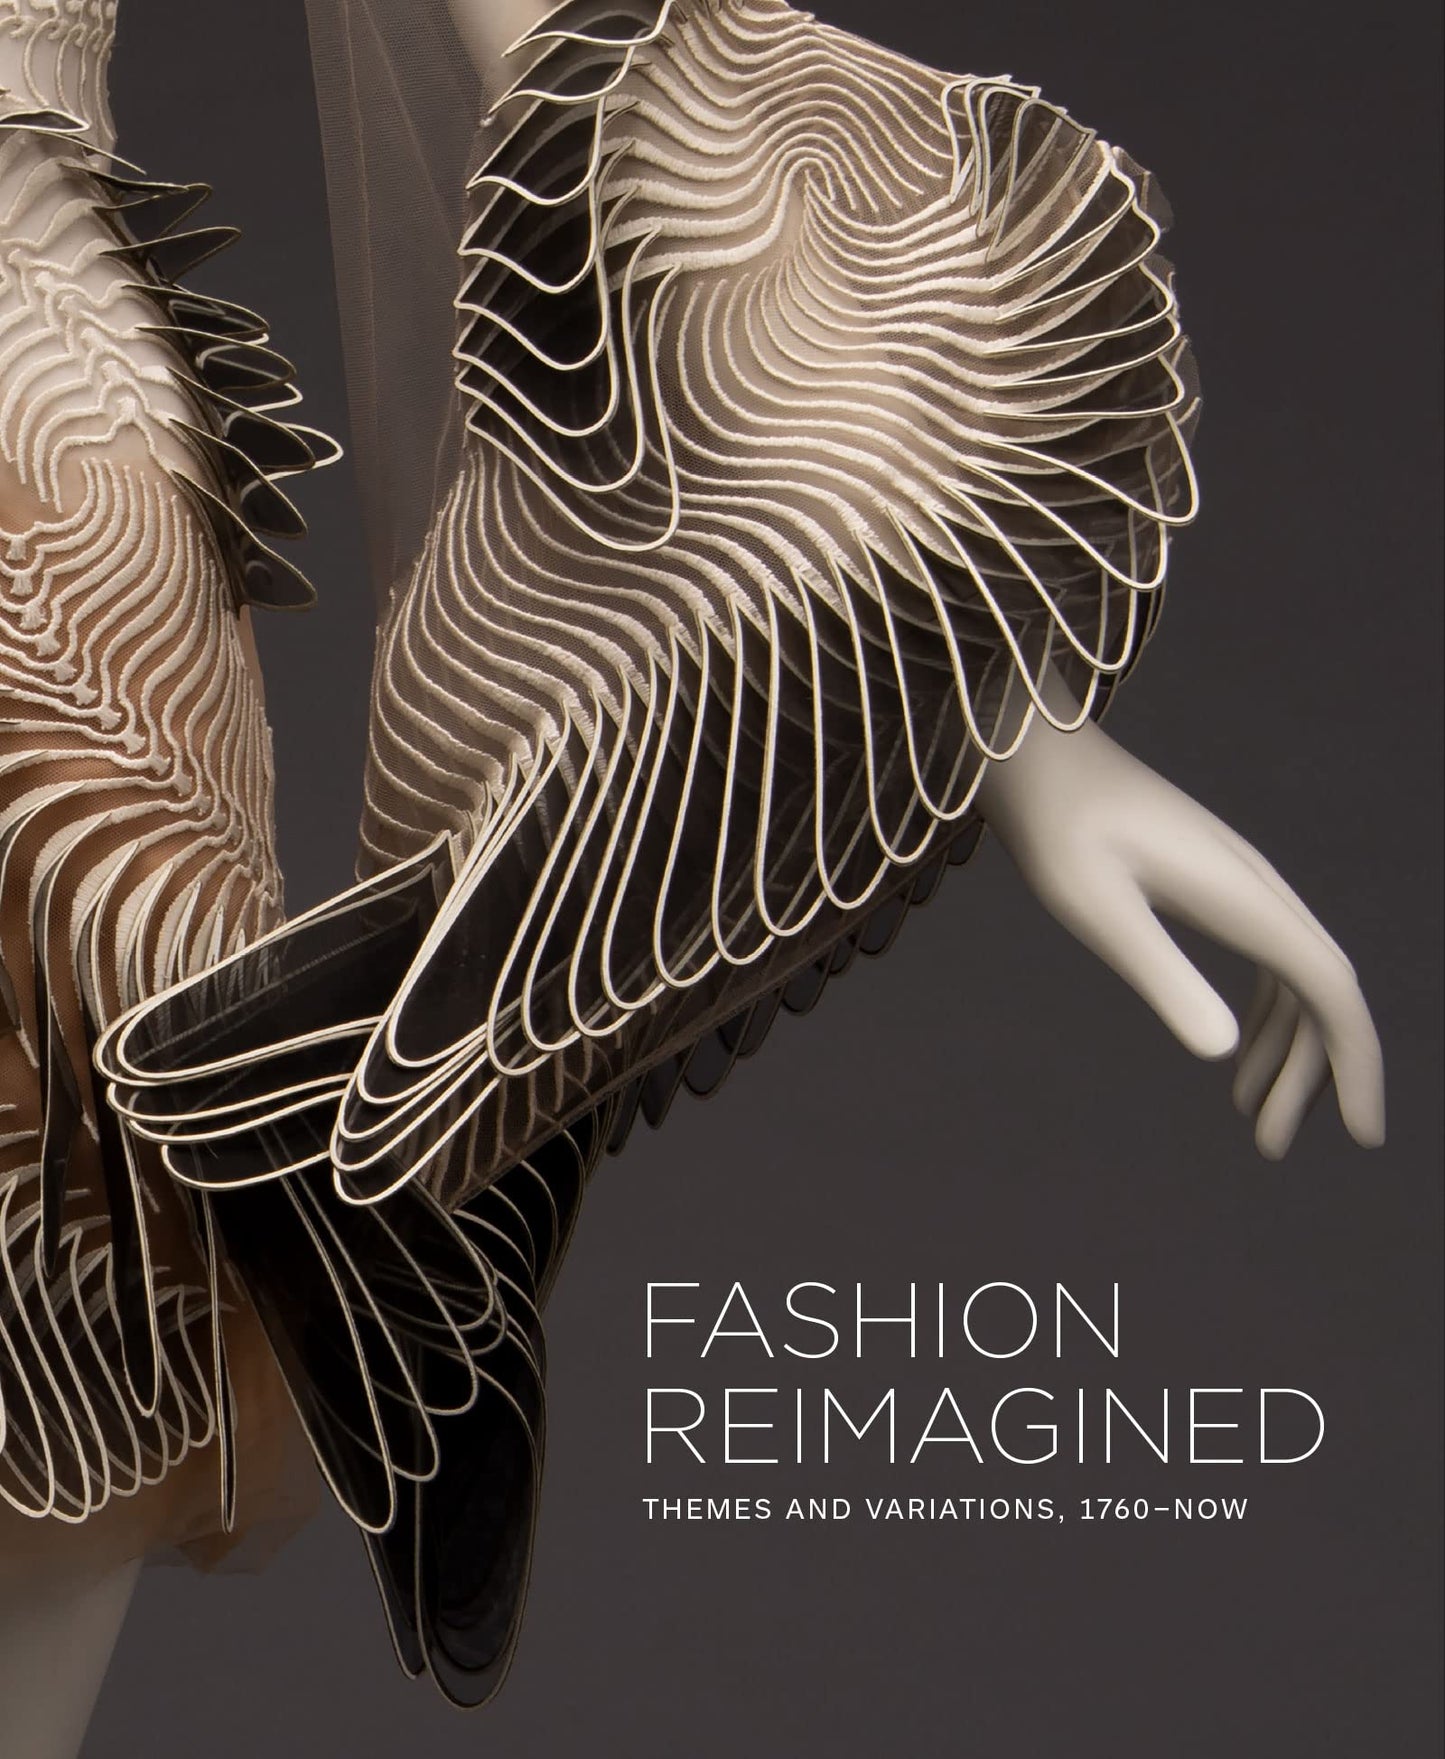 Fashion Reimagined: Themes and Variations, 1760-Now